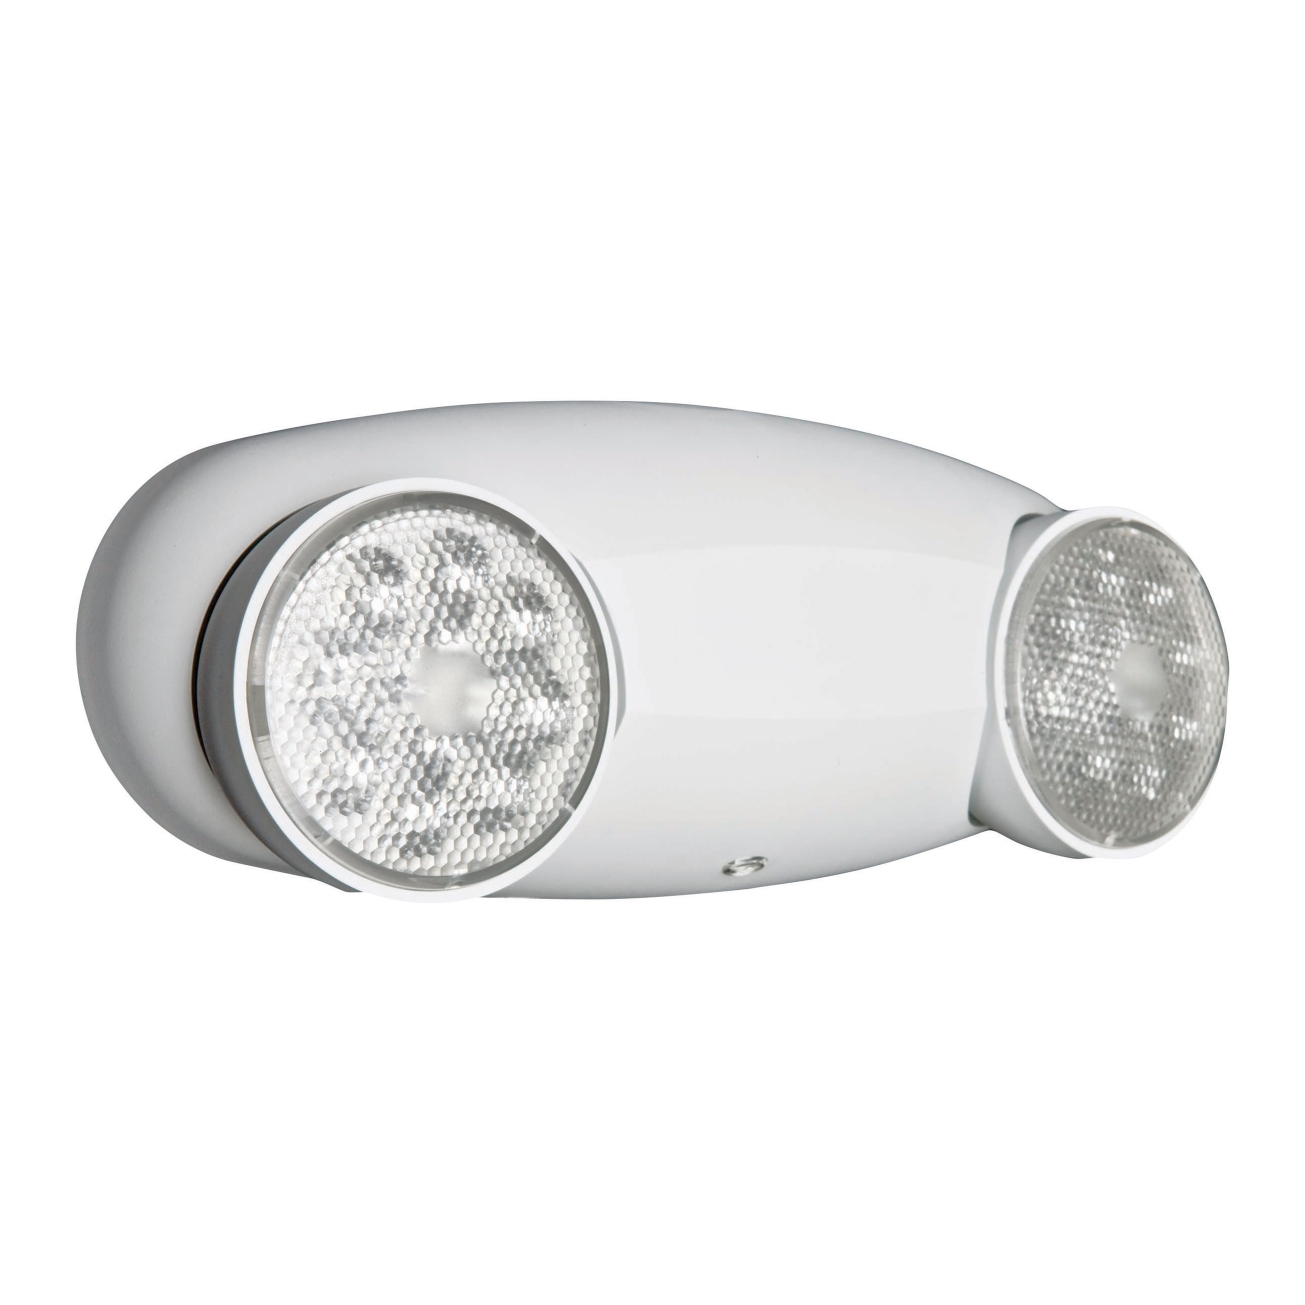 Lithonia Ceiling Mounted Emergency Lights